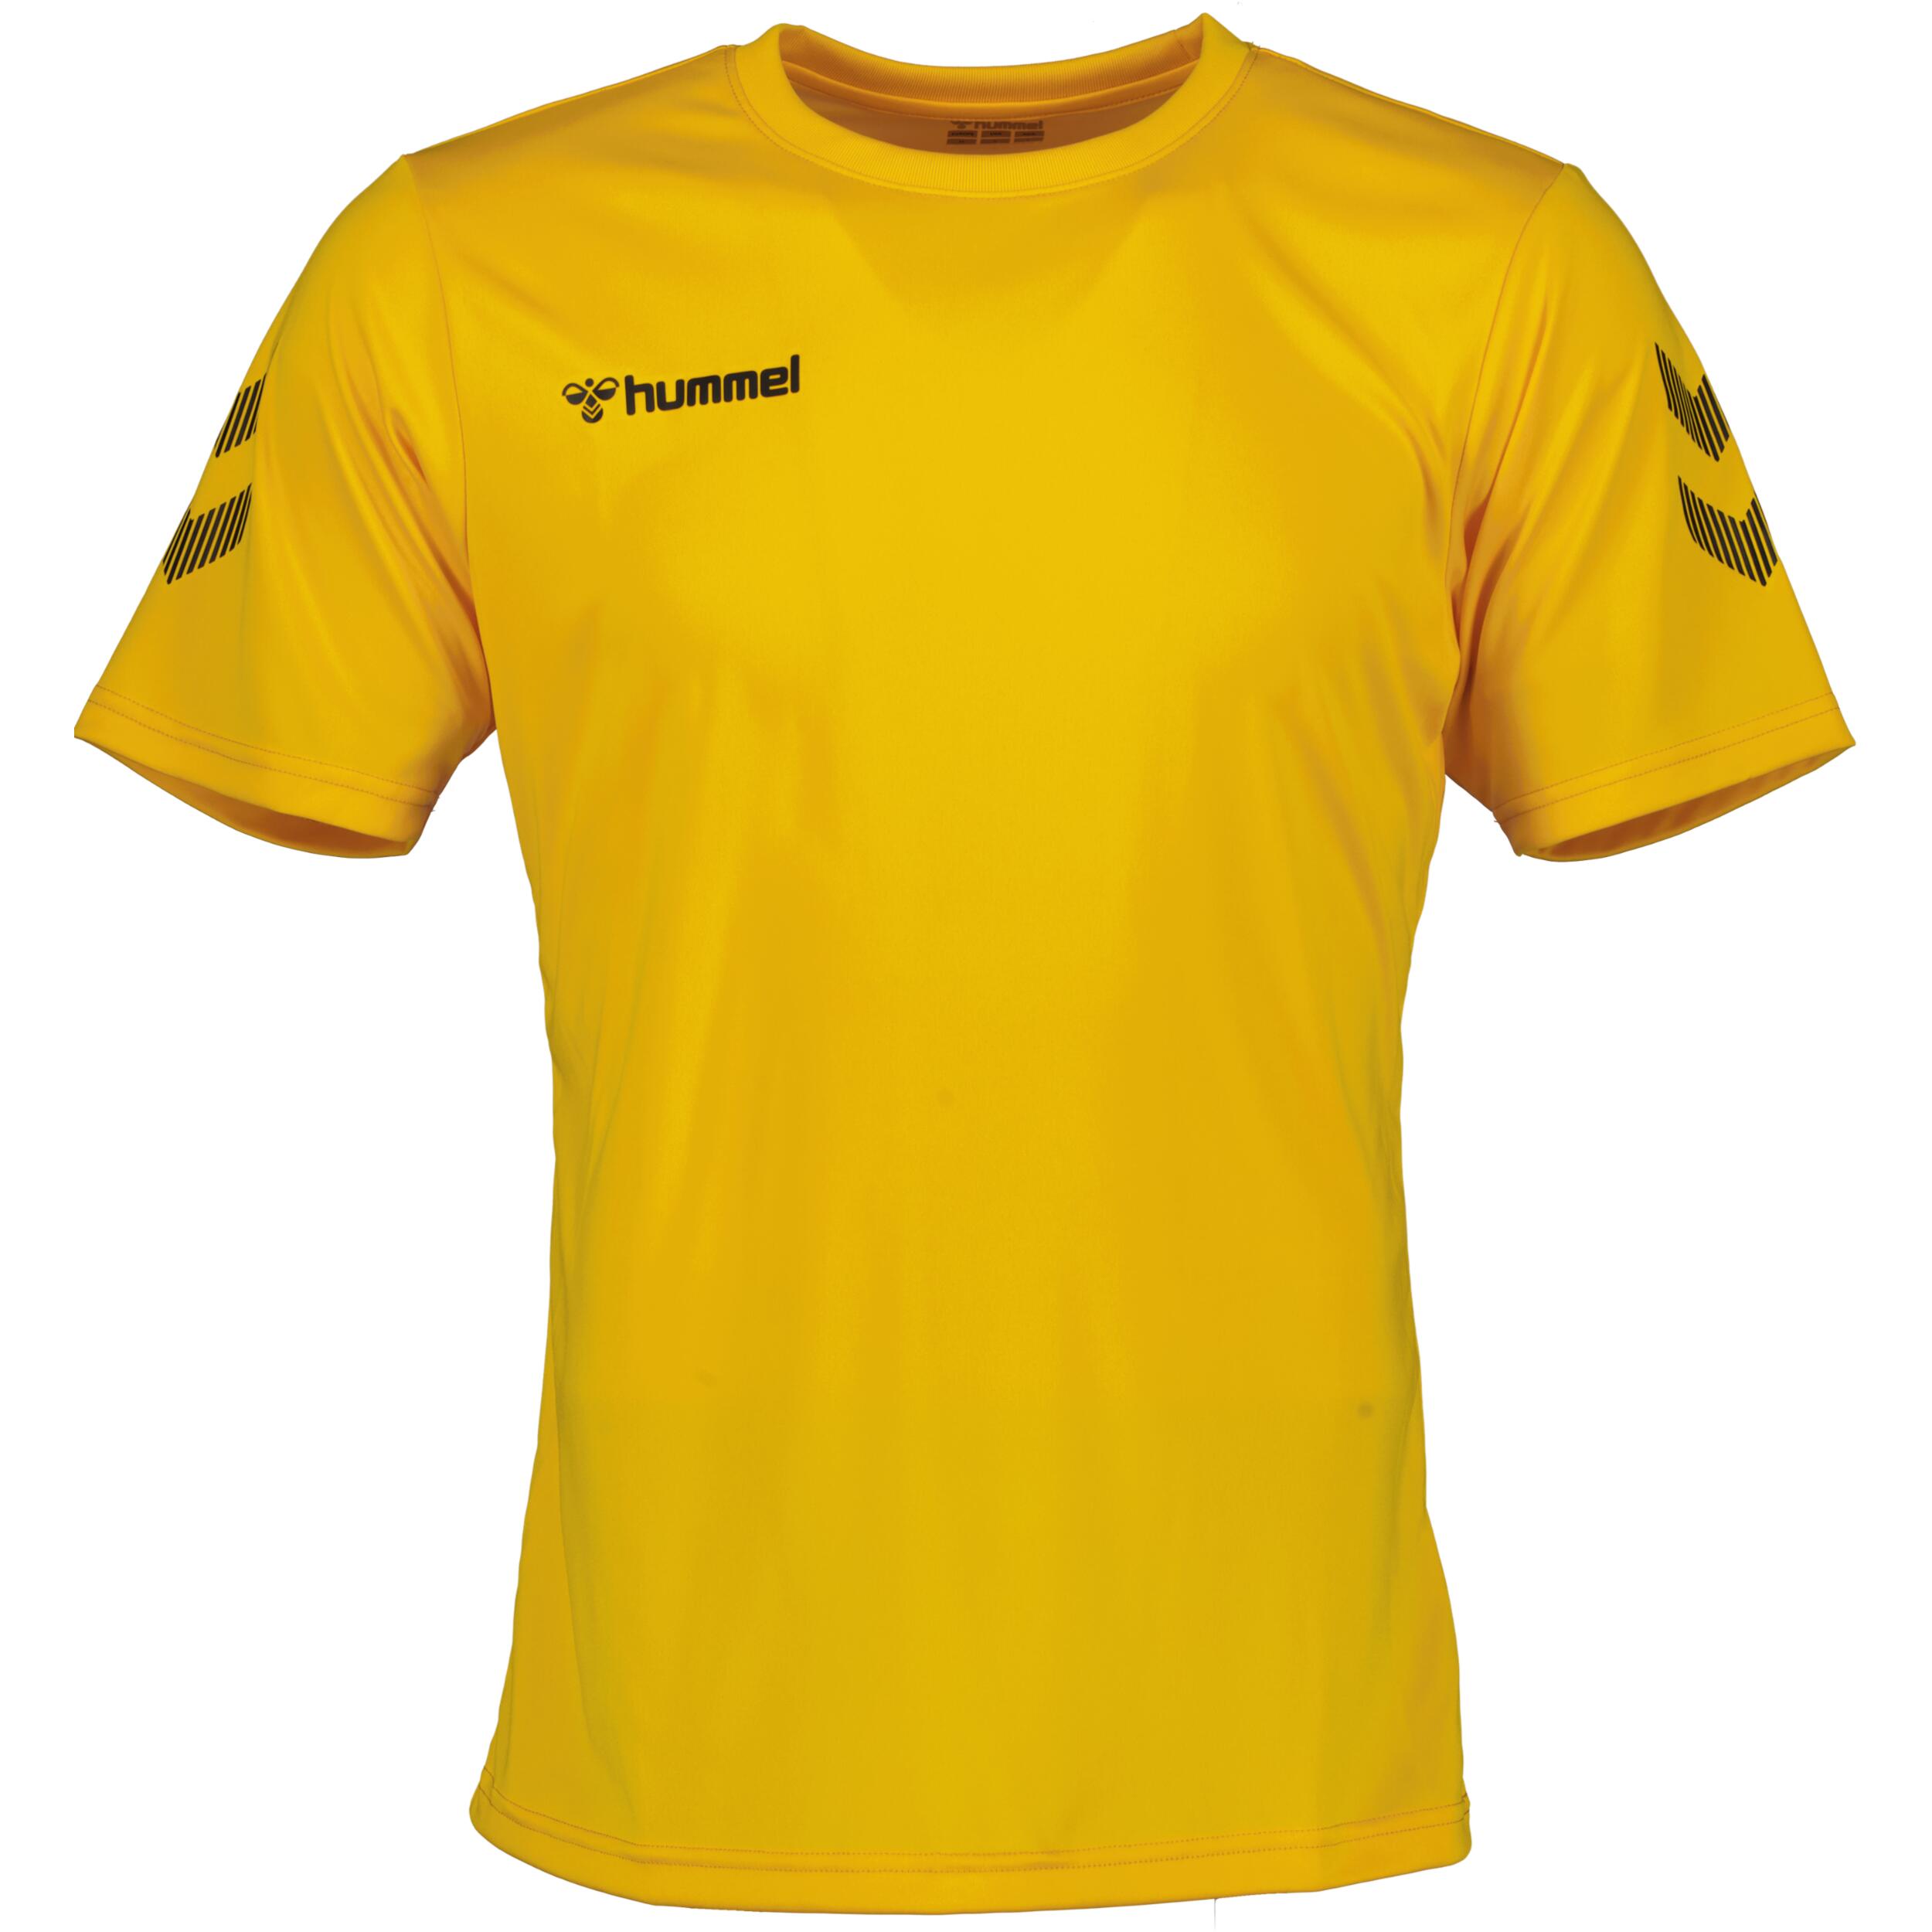 Solo jersey for kids, great for football, in sports yellow 1/3